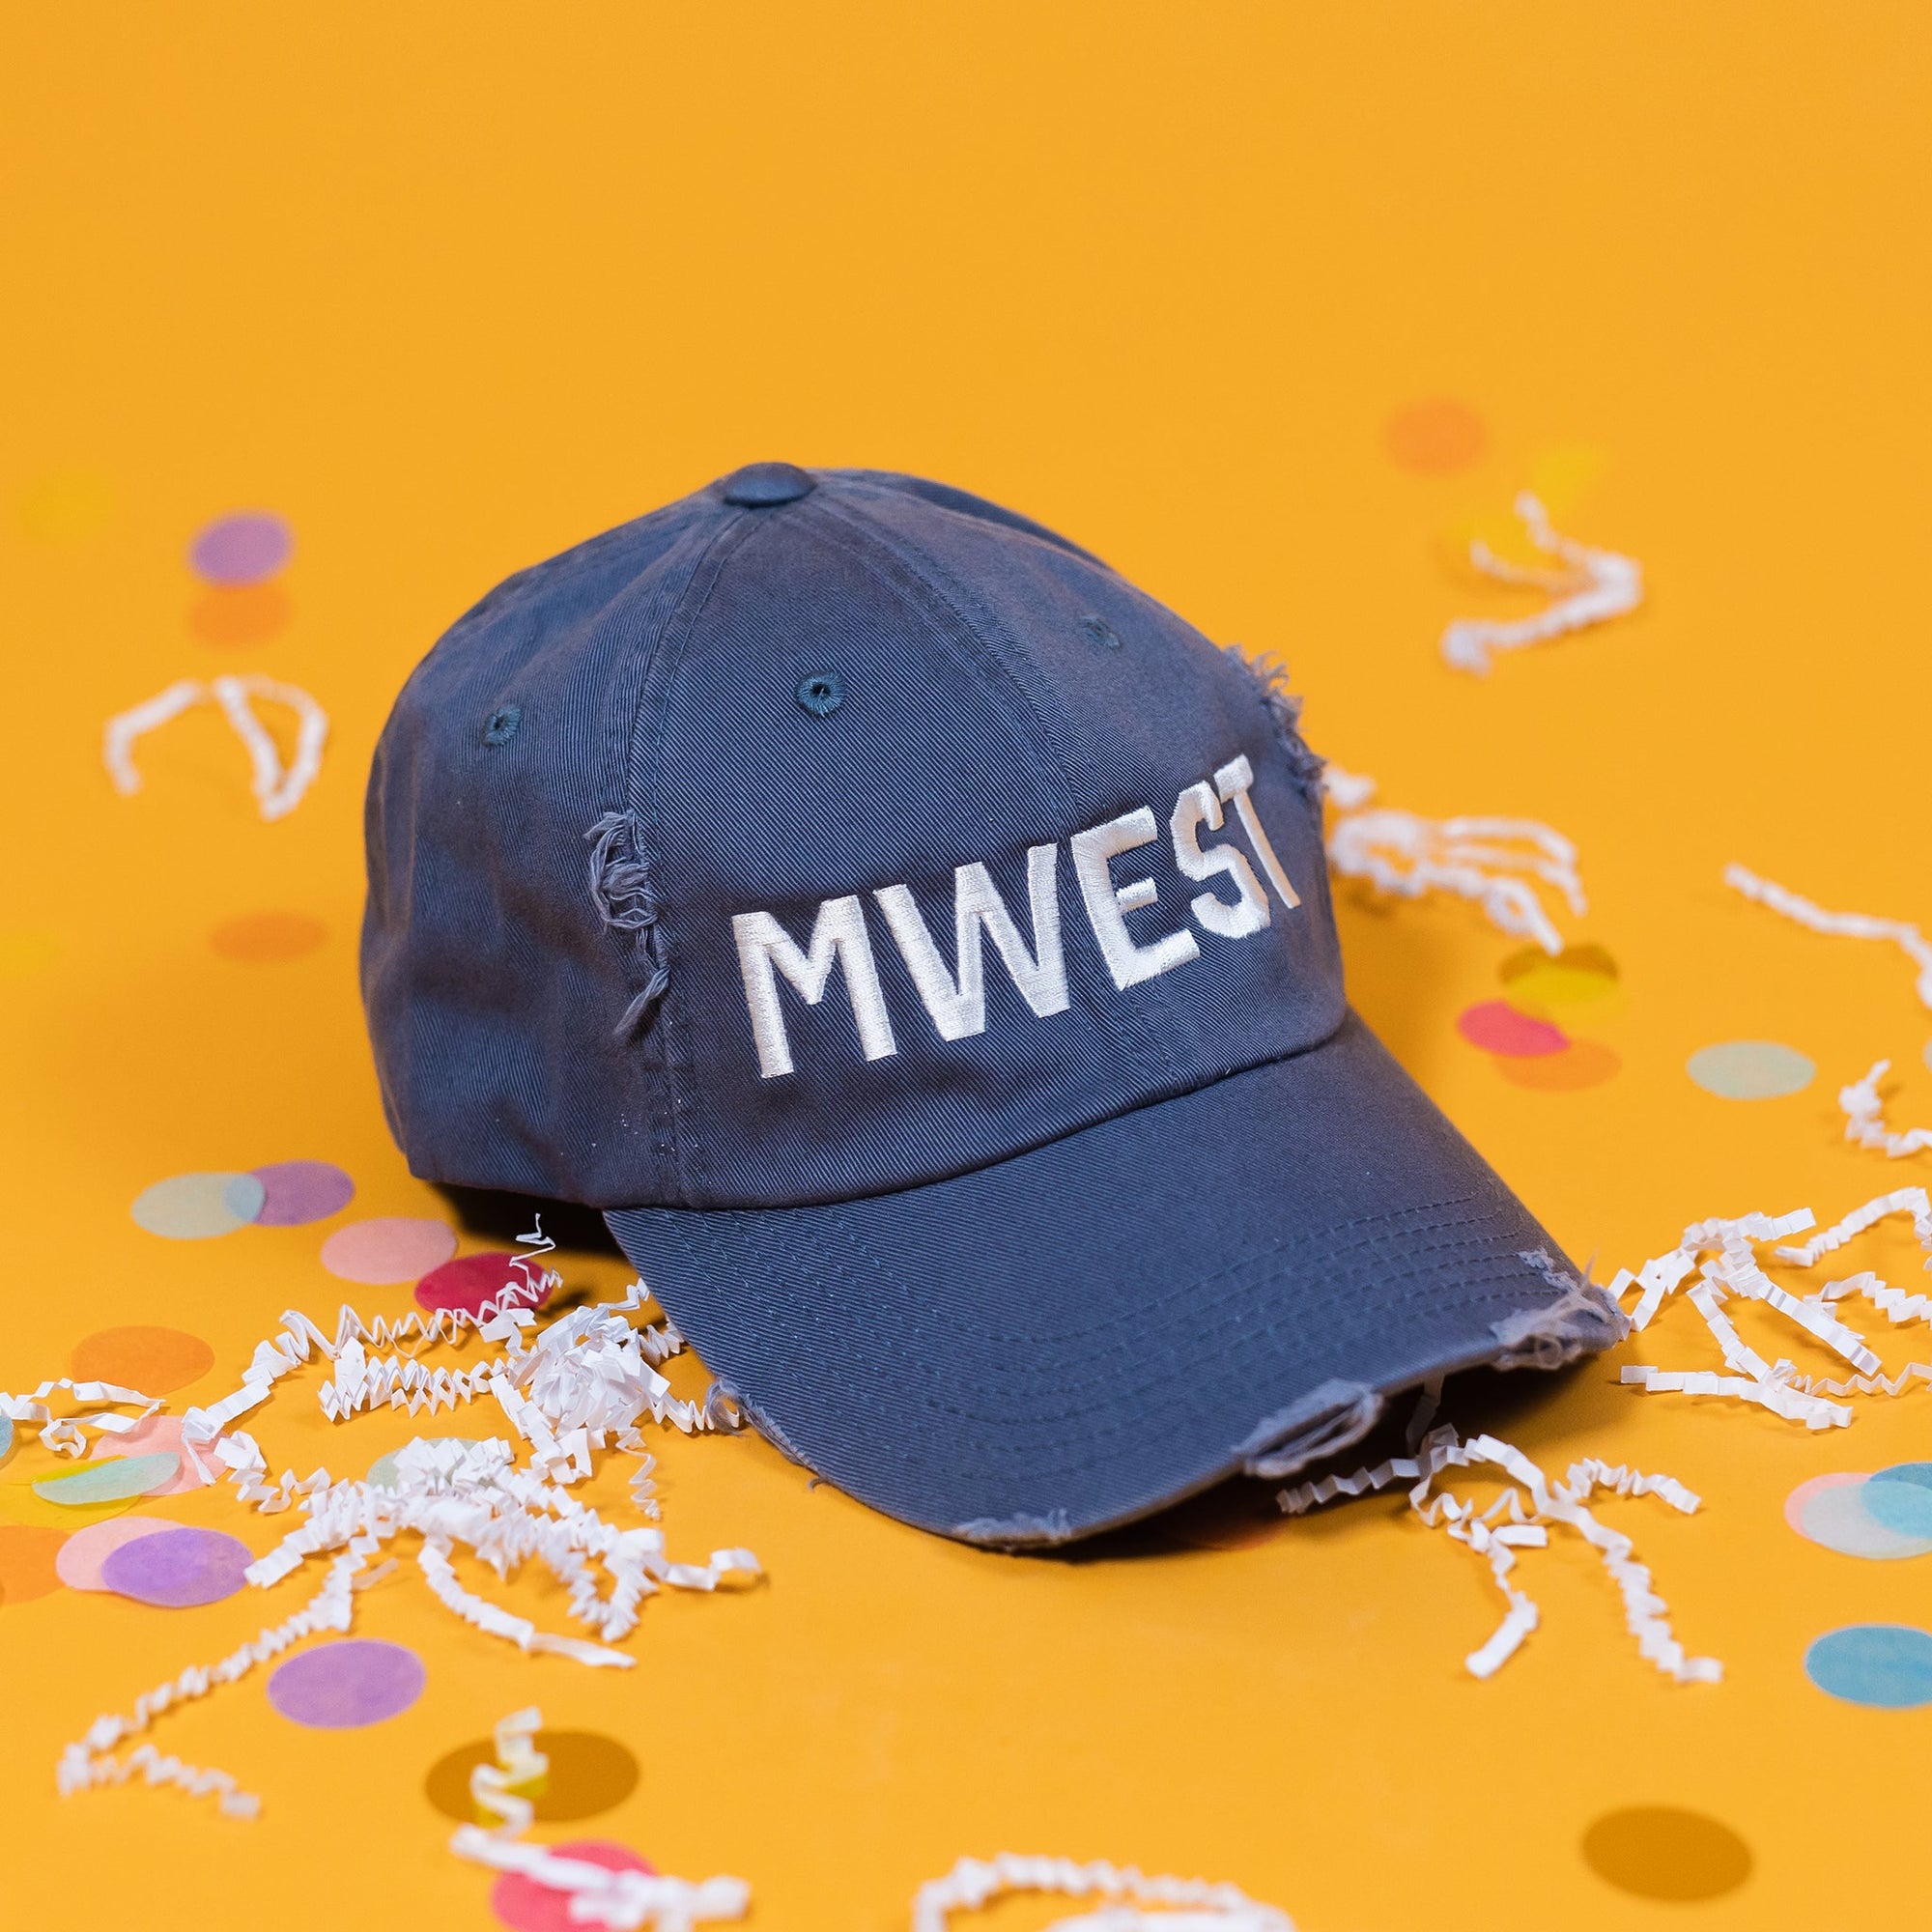 On a sunny mustard background sits a navy hat with white crinkle and big, colorful confetti scattered around. The hat is distressed with bold, white embroidered lettering that says "MWEST."